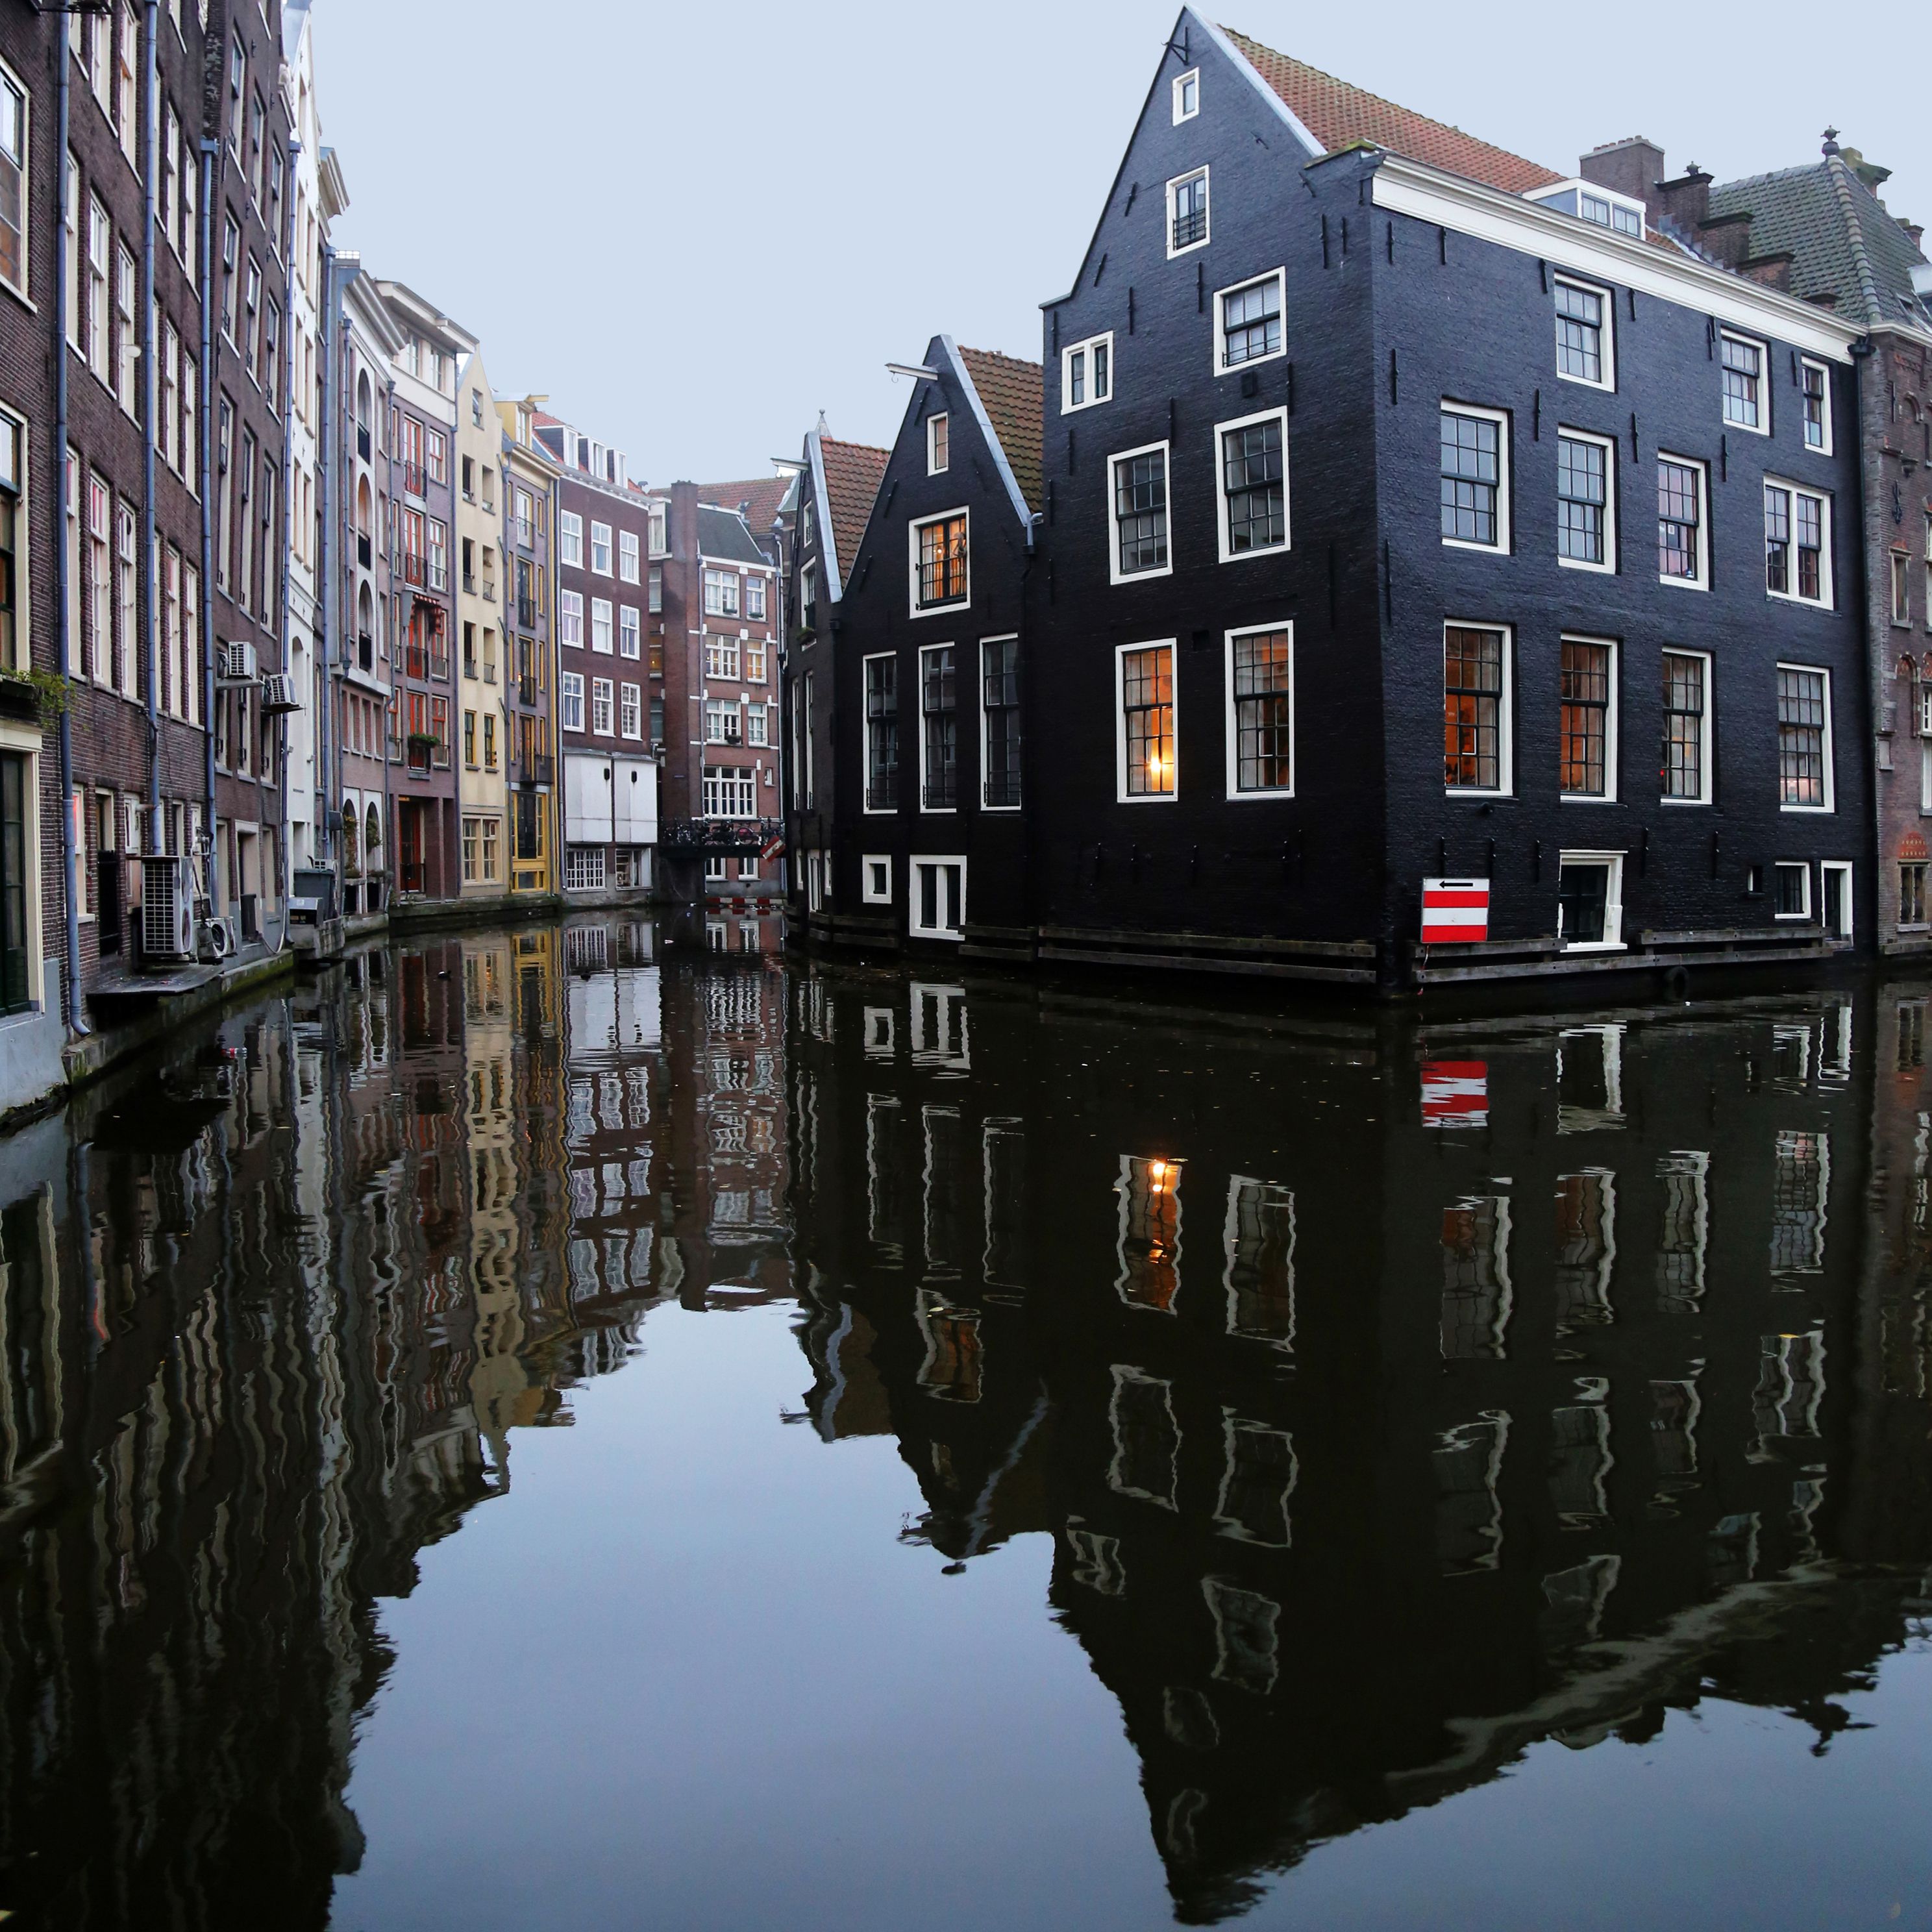 blimedesign: Vacation Homes In Amsterdam